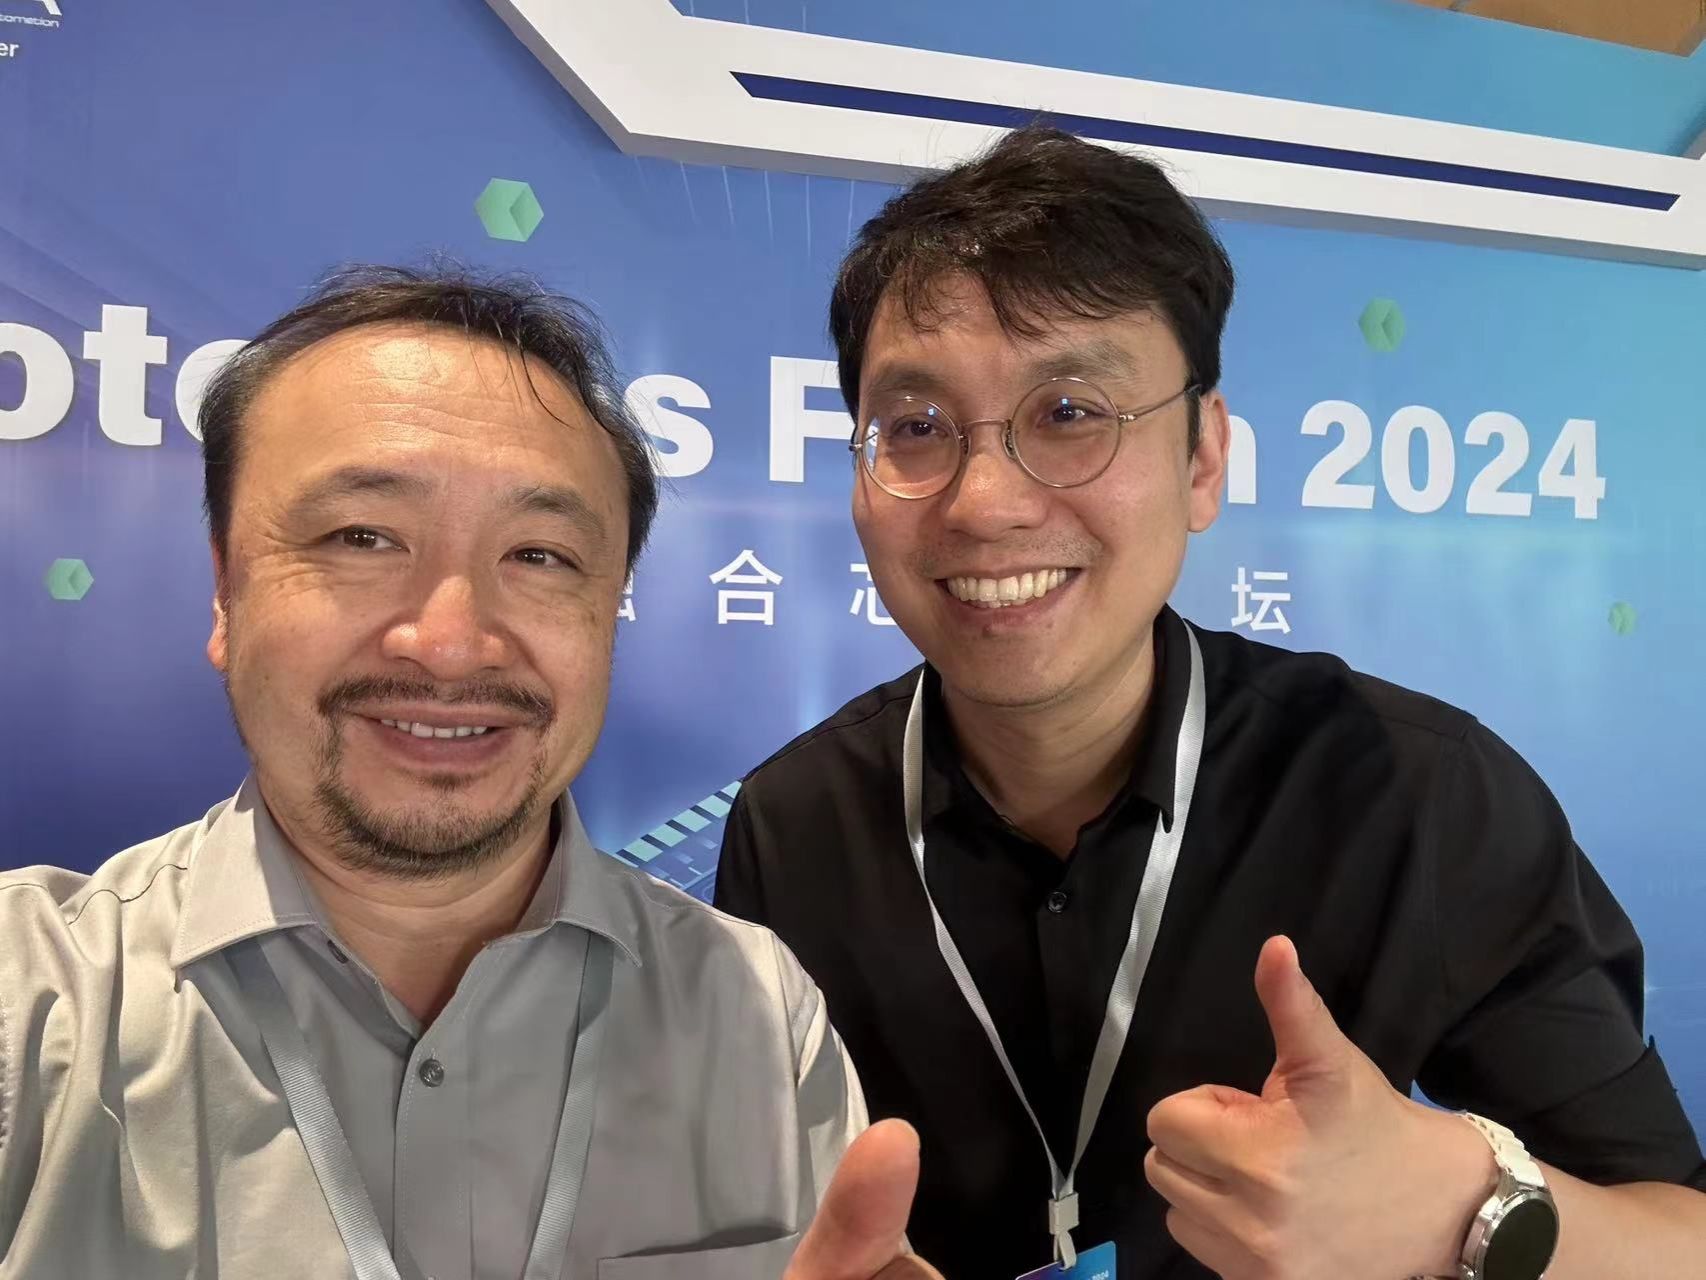 Photo with the IEEE Photonics Society President Prof. Perry Ping Shum at HKUST Guangzhou (2024)